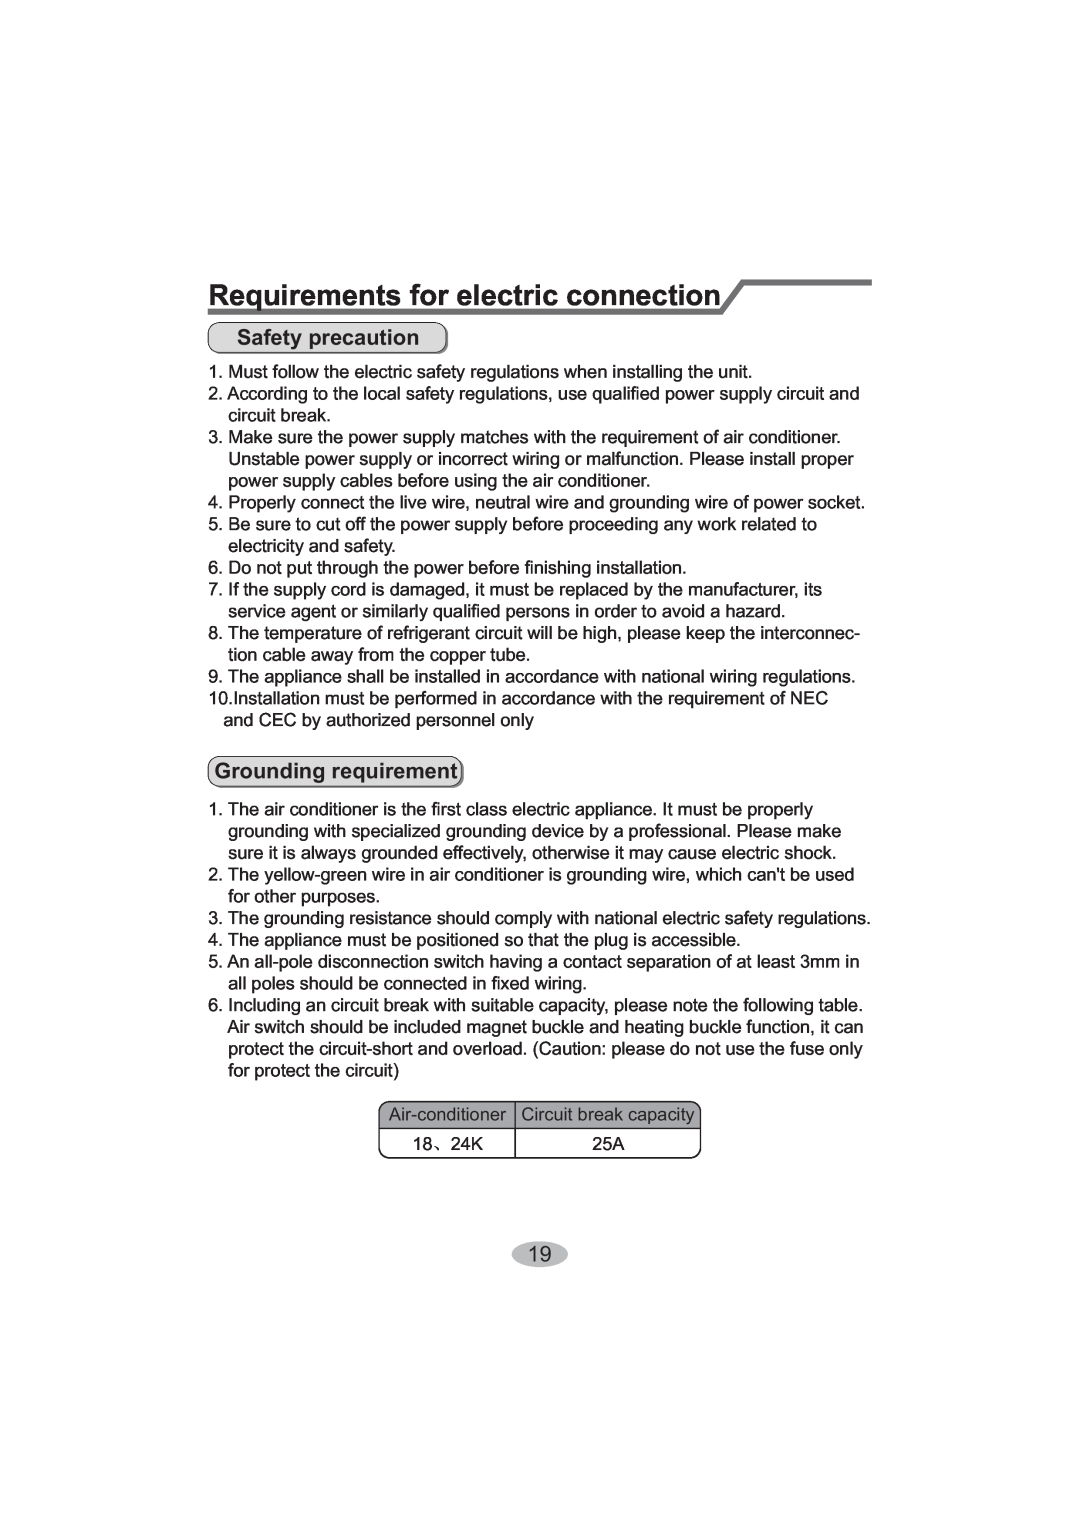 Beko BK 5200, BK 6300 user manual Requirements for electric connection, Safety precaution, Grounding requirement 